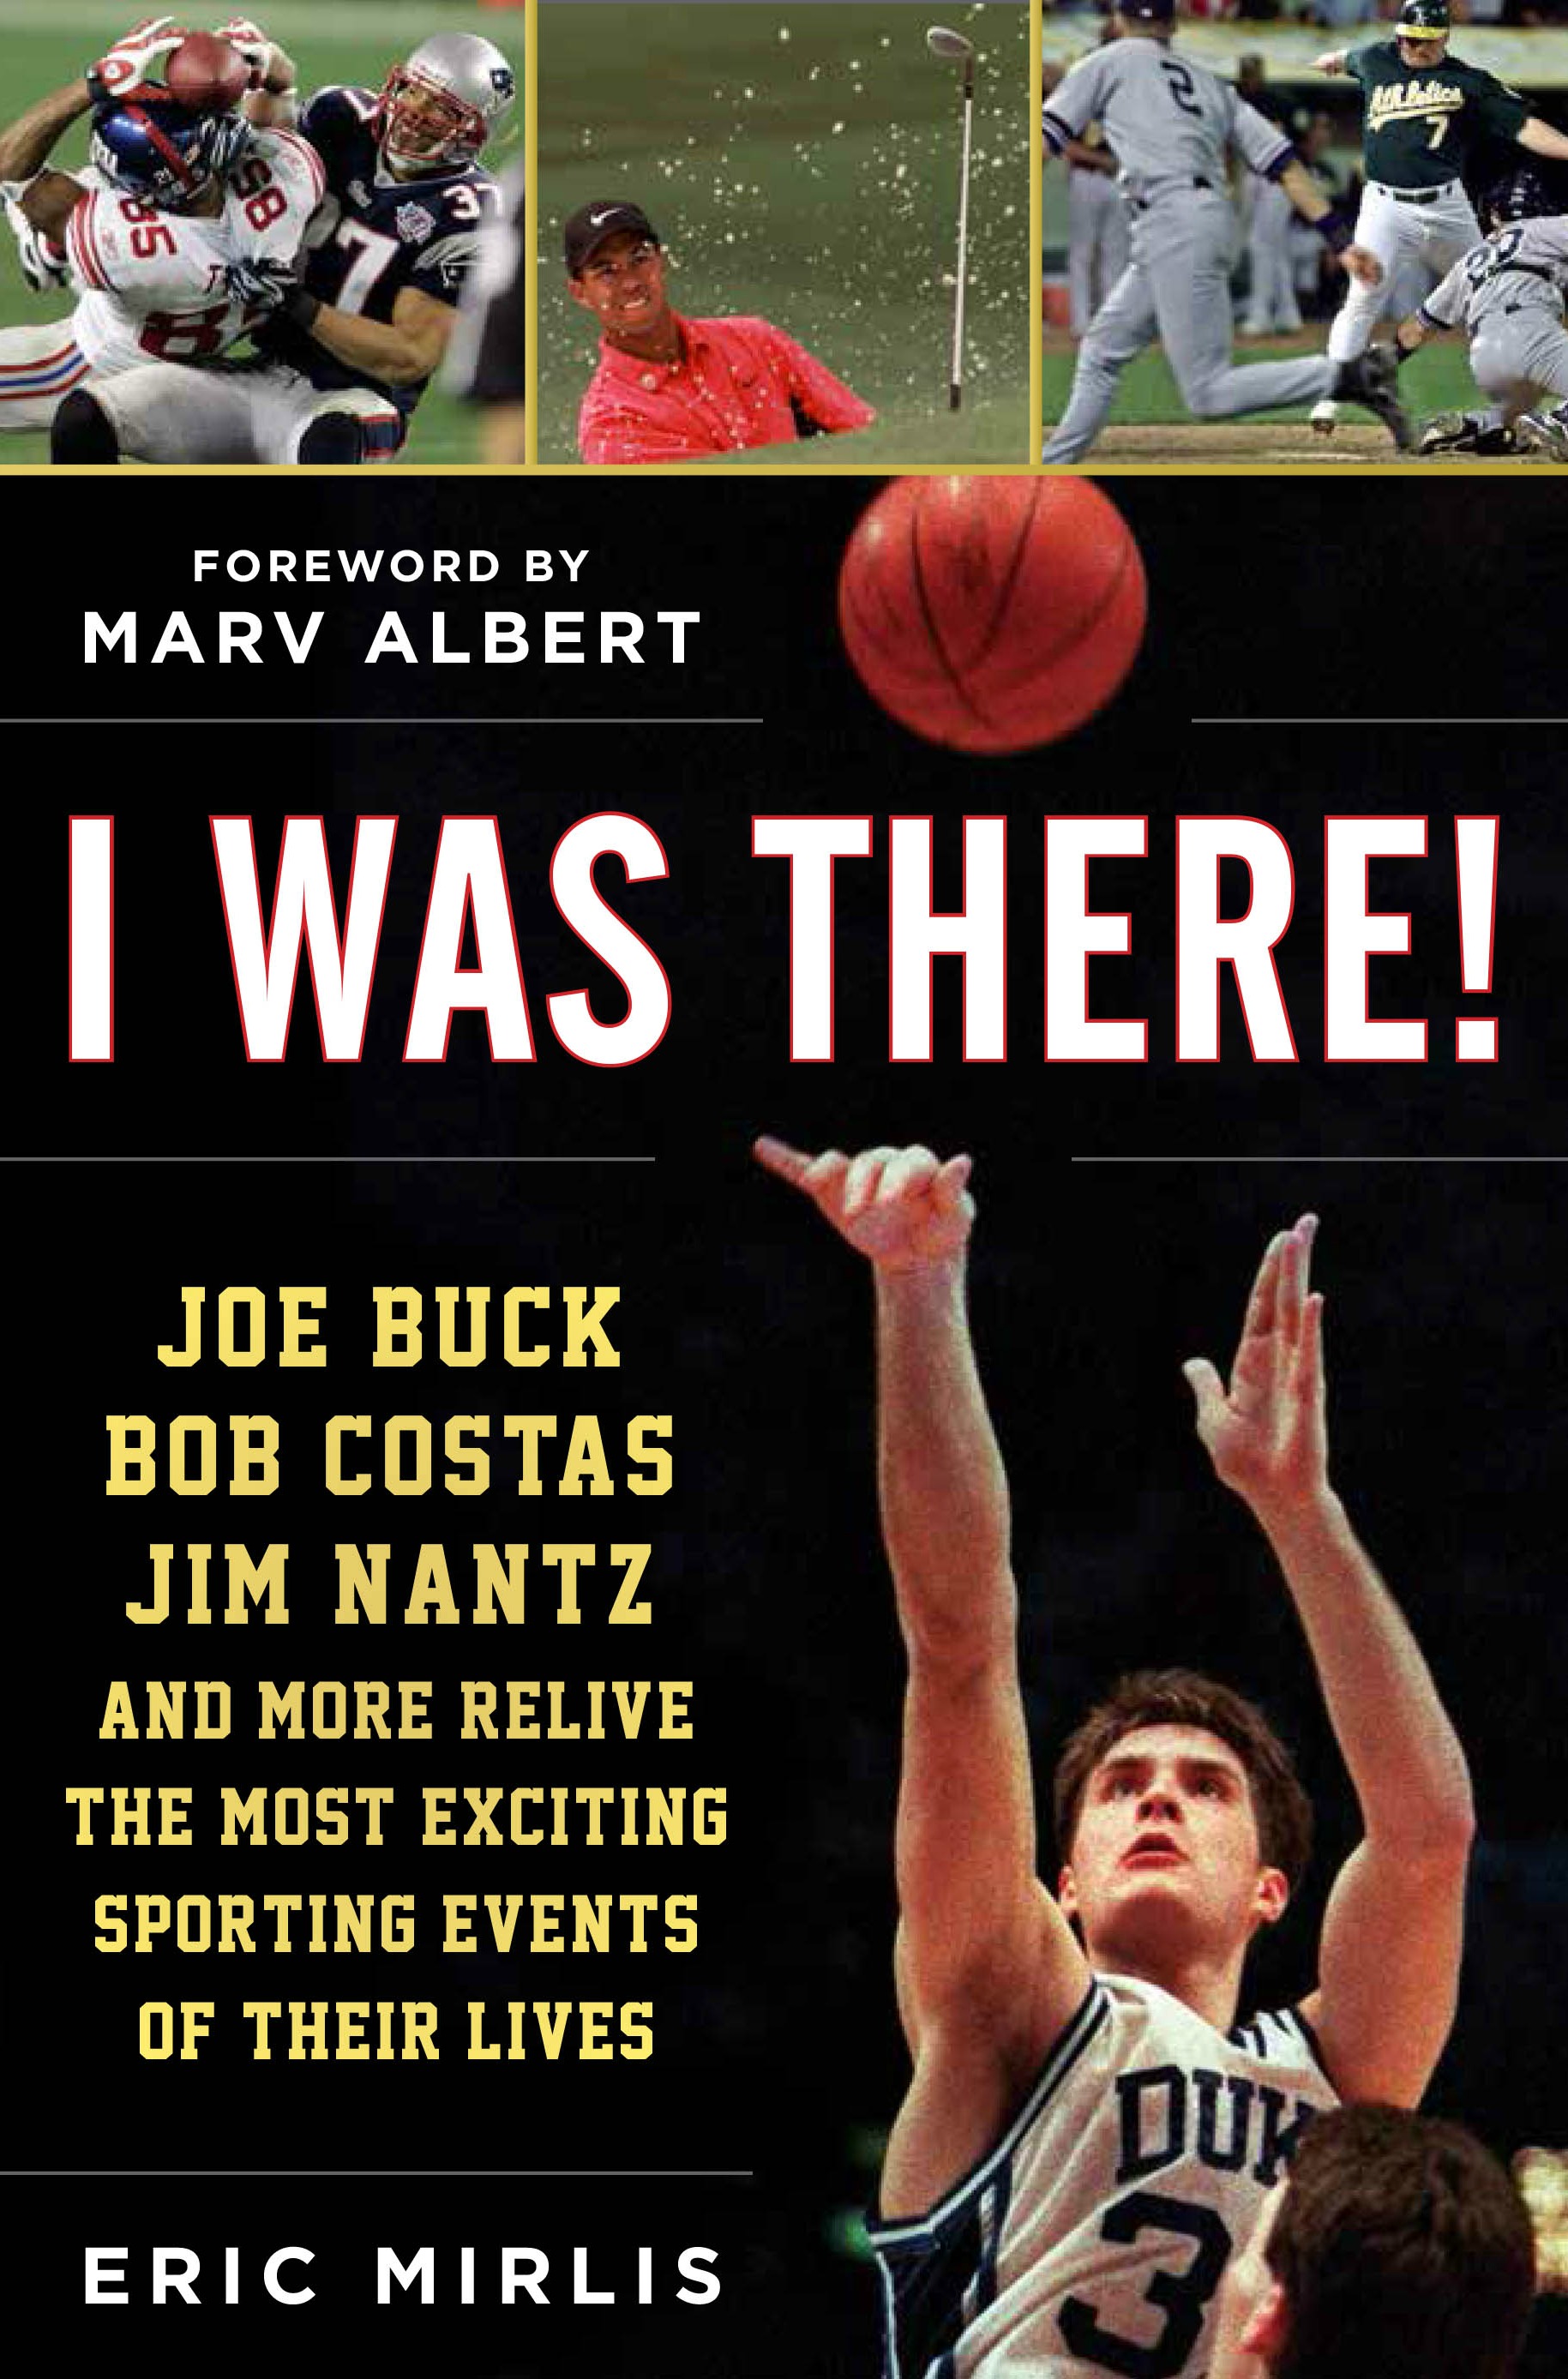 "I Was There!" book cover. (Photo: Eric Mirlis)